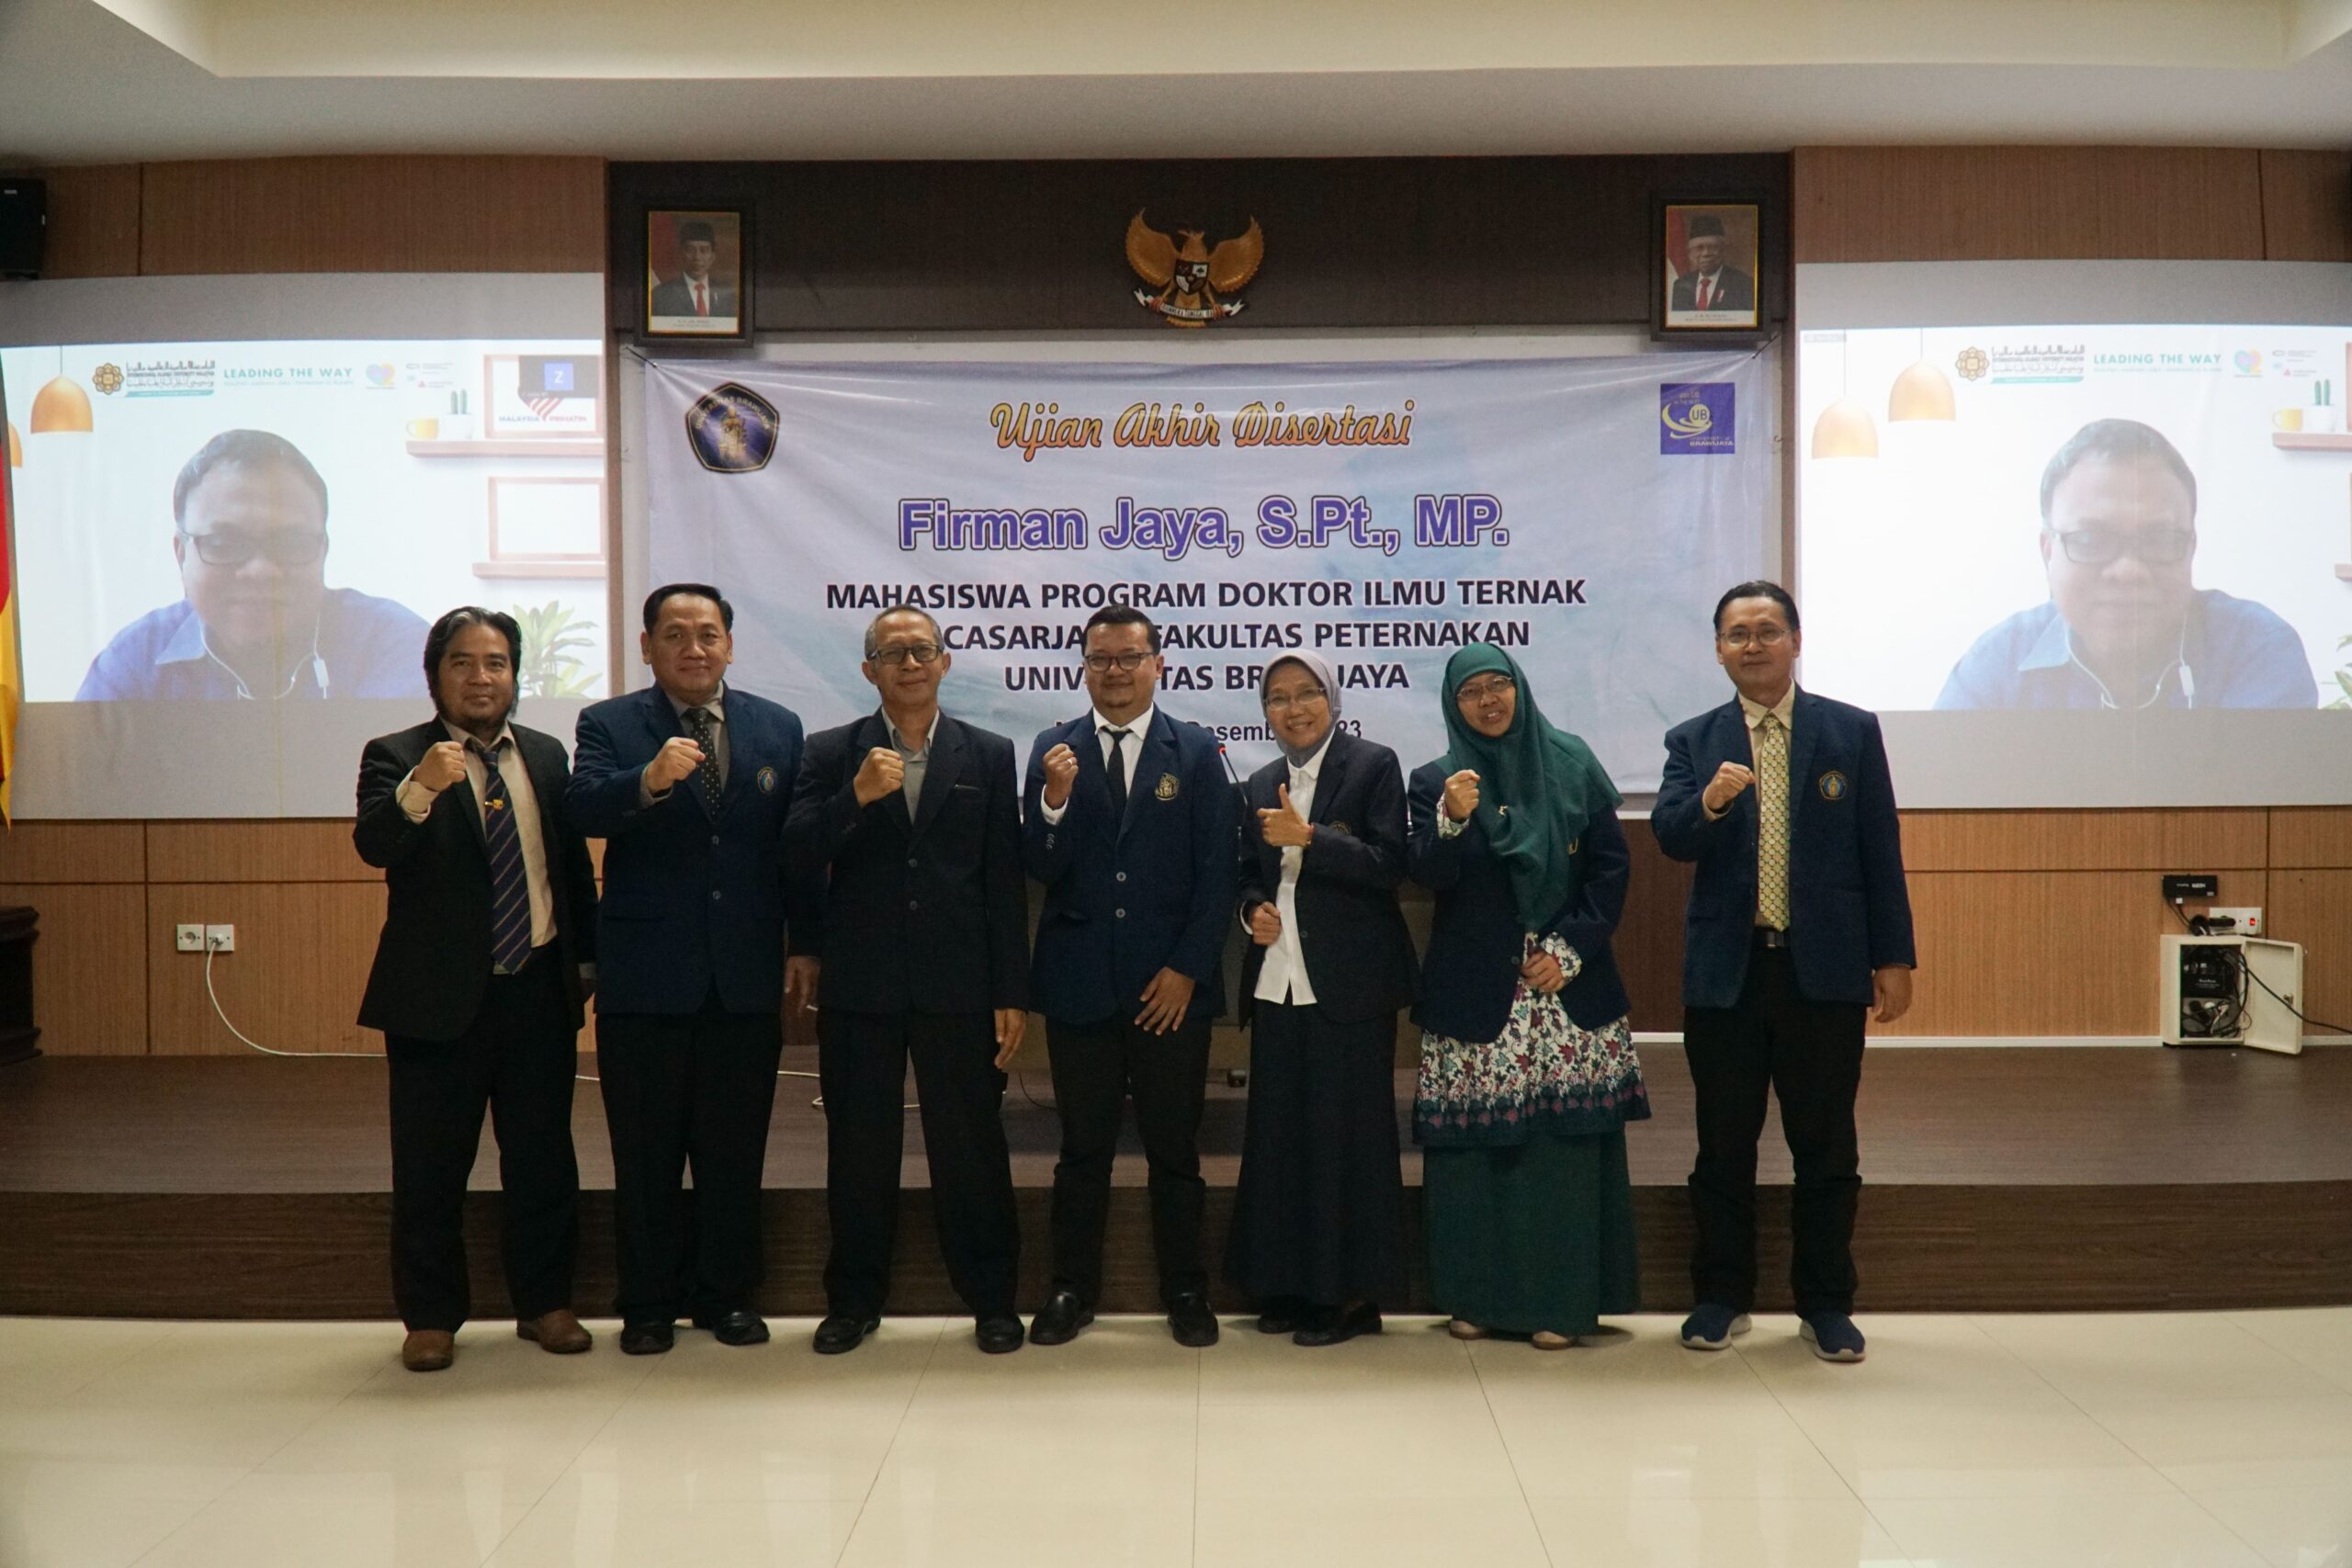 Firman Jaya, S.Pt., MP., successfully defended his Doctoral thesis with a research focus on powdered honey.